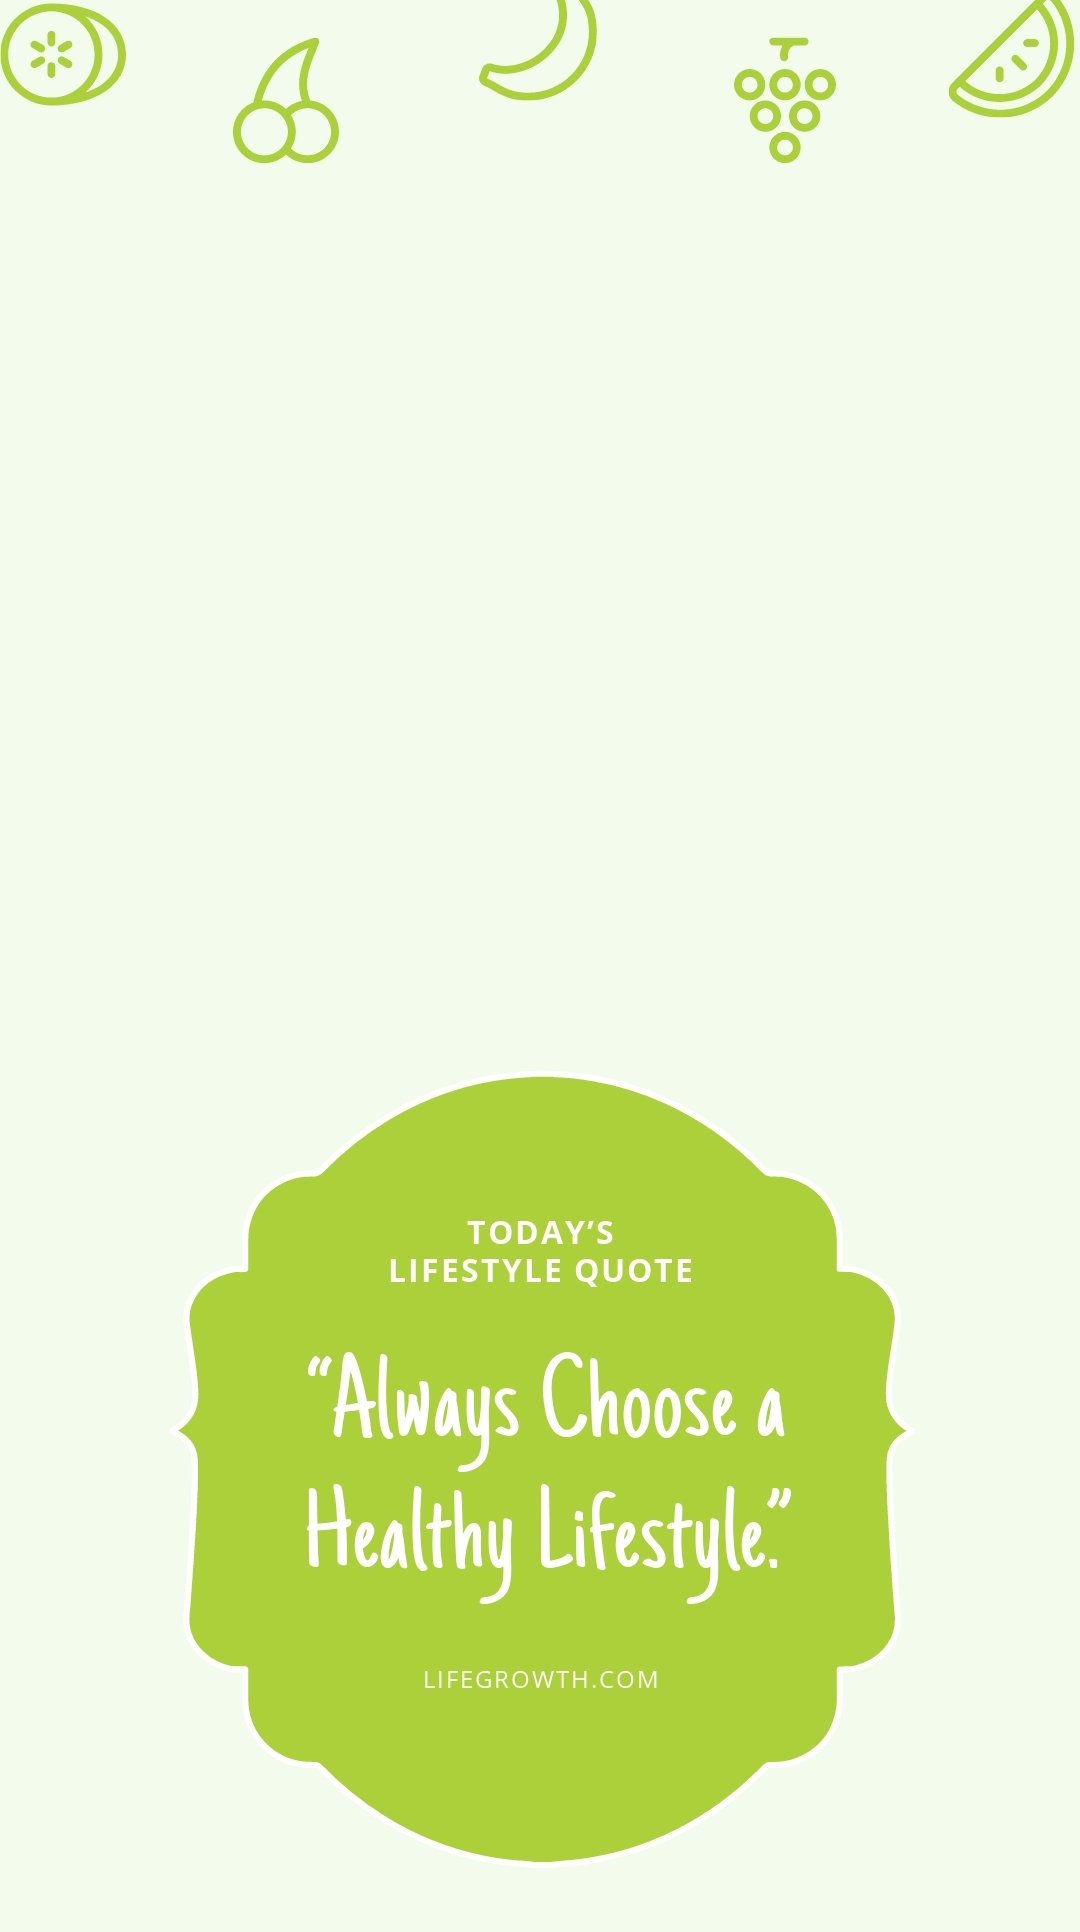 Lifestyle Quote Snapchat Geofilter